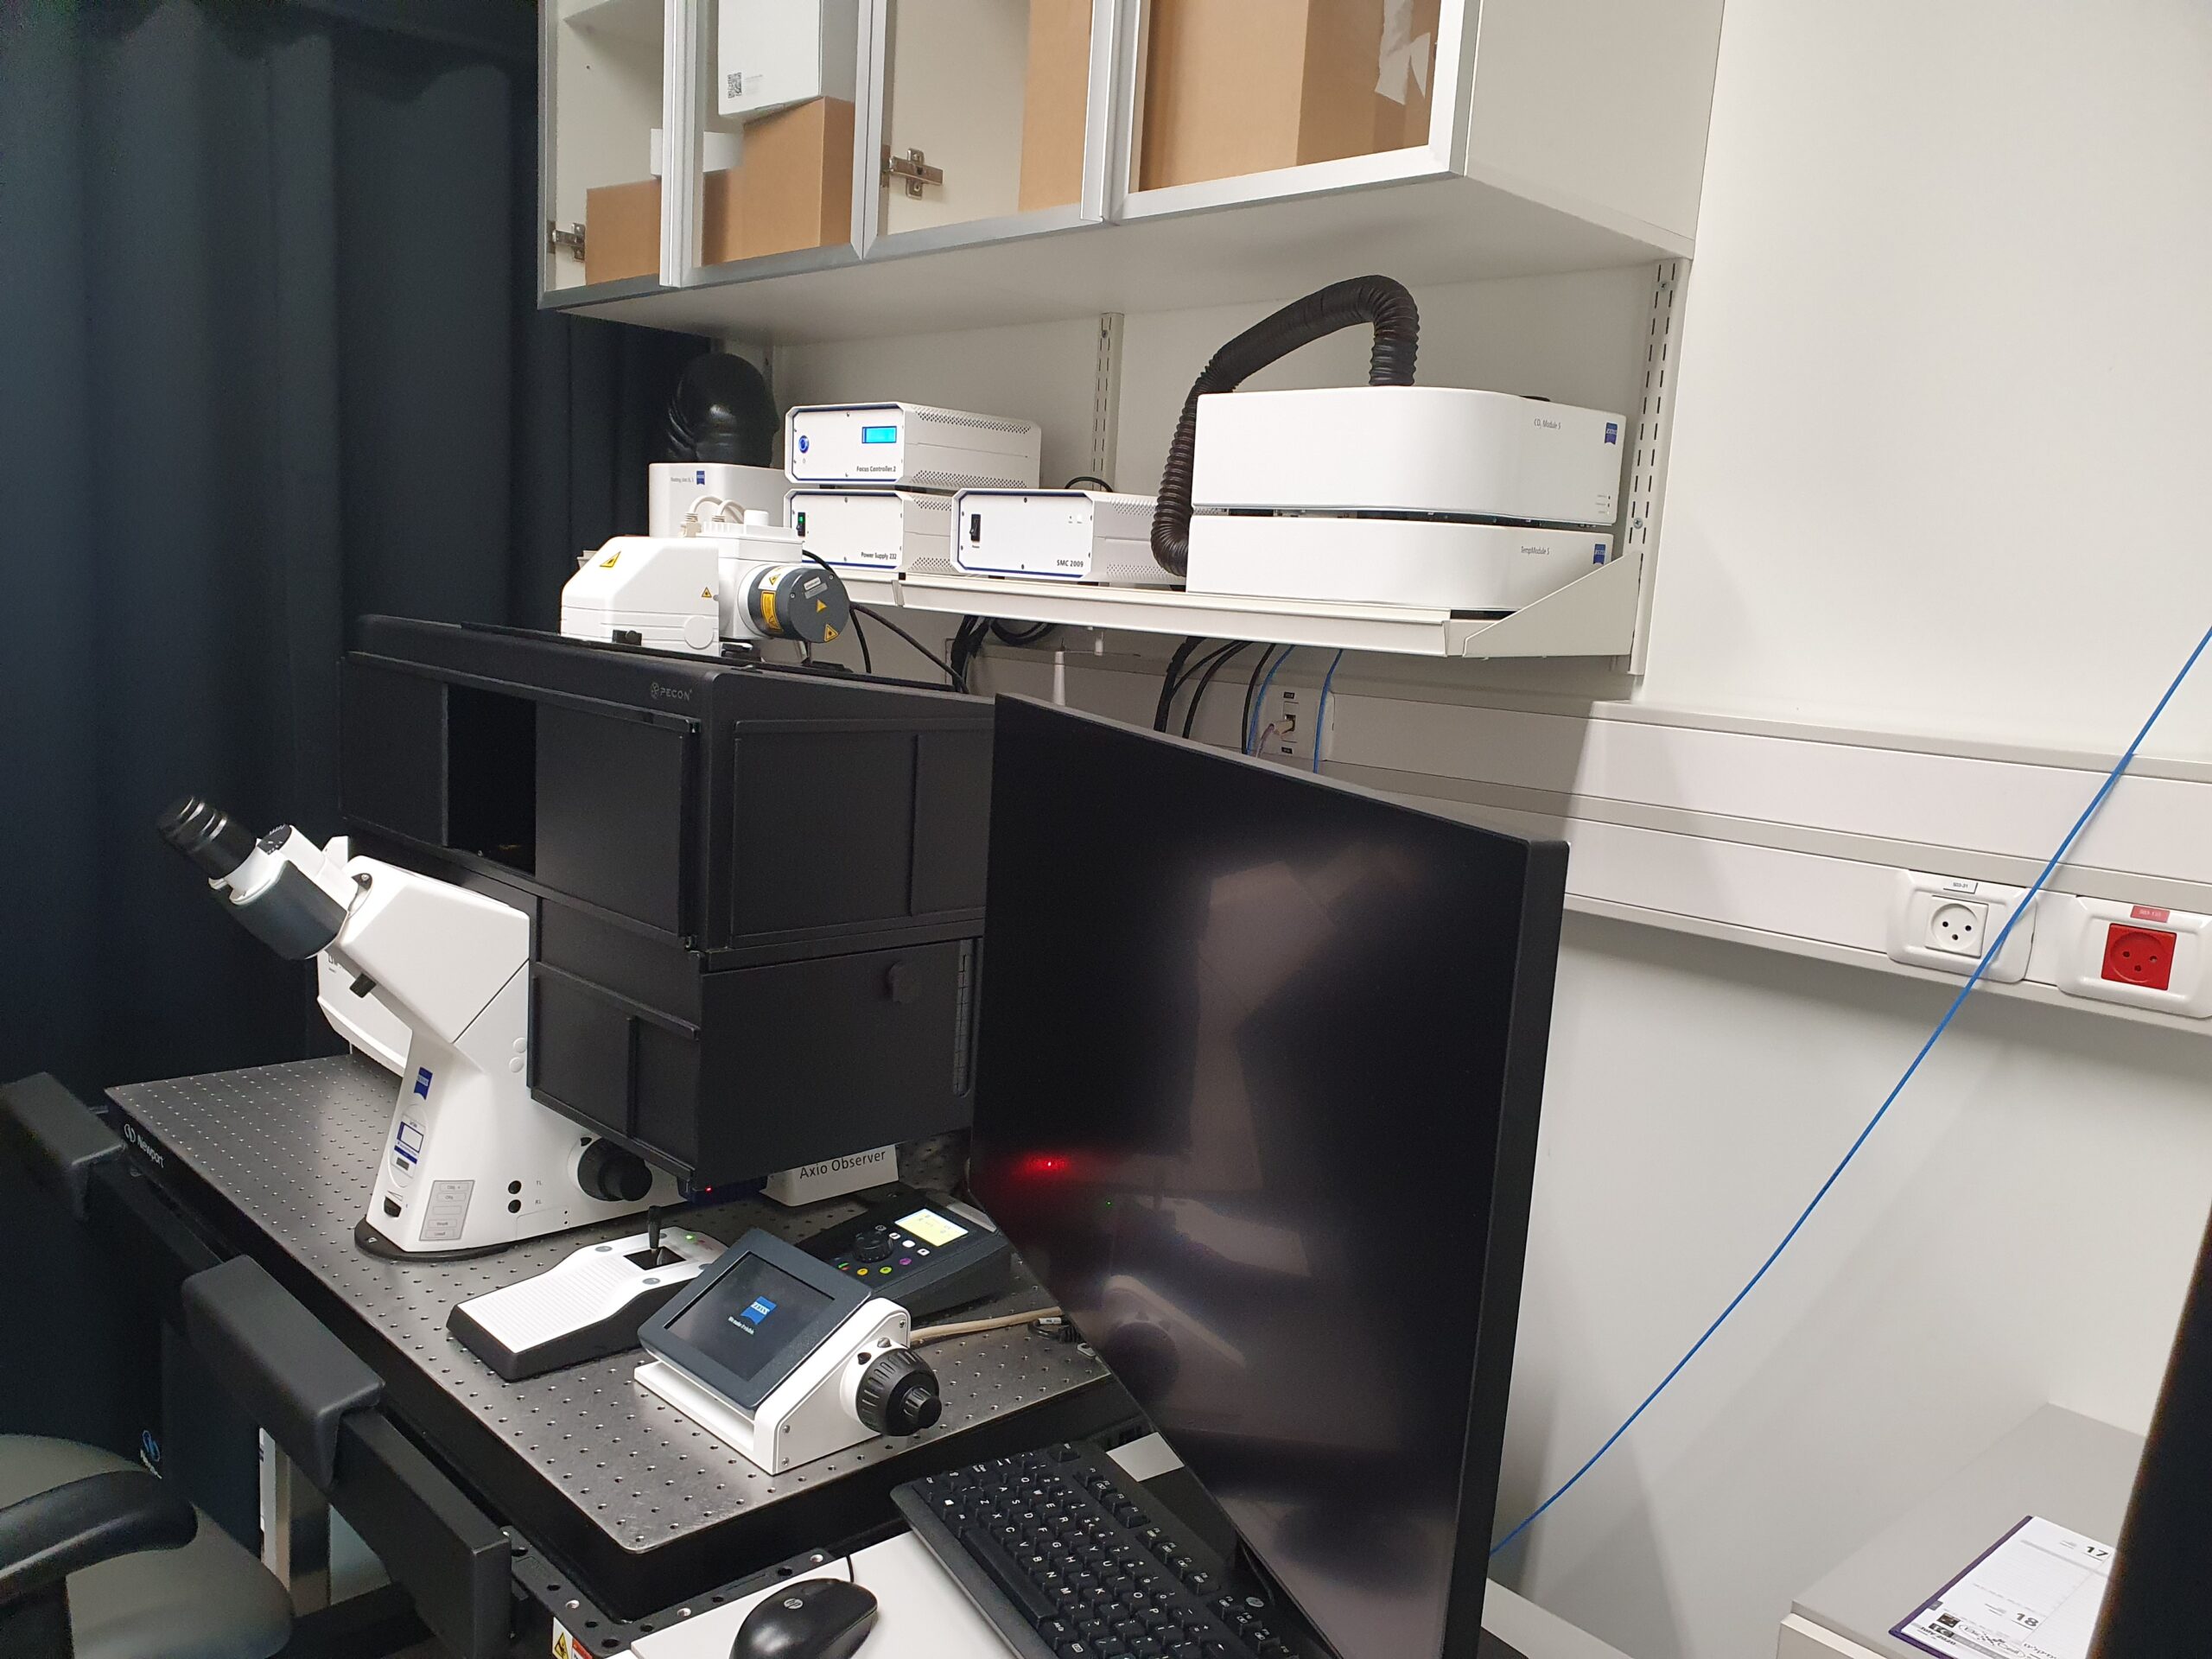 Our super resolution confocal microscope